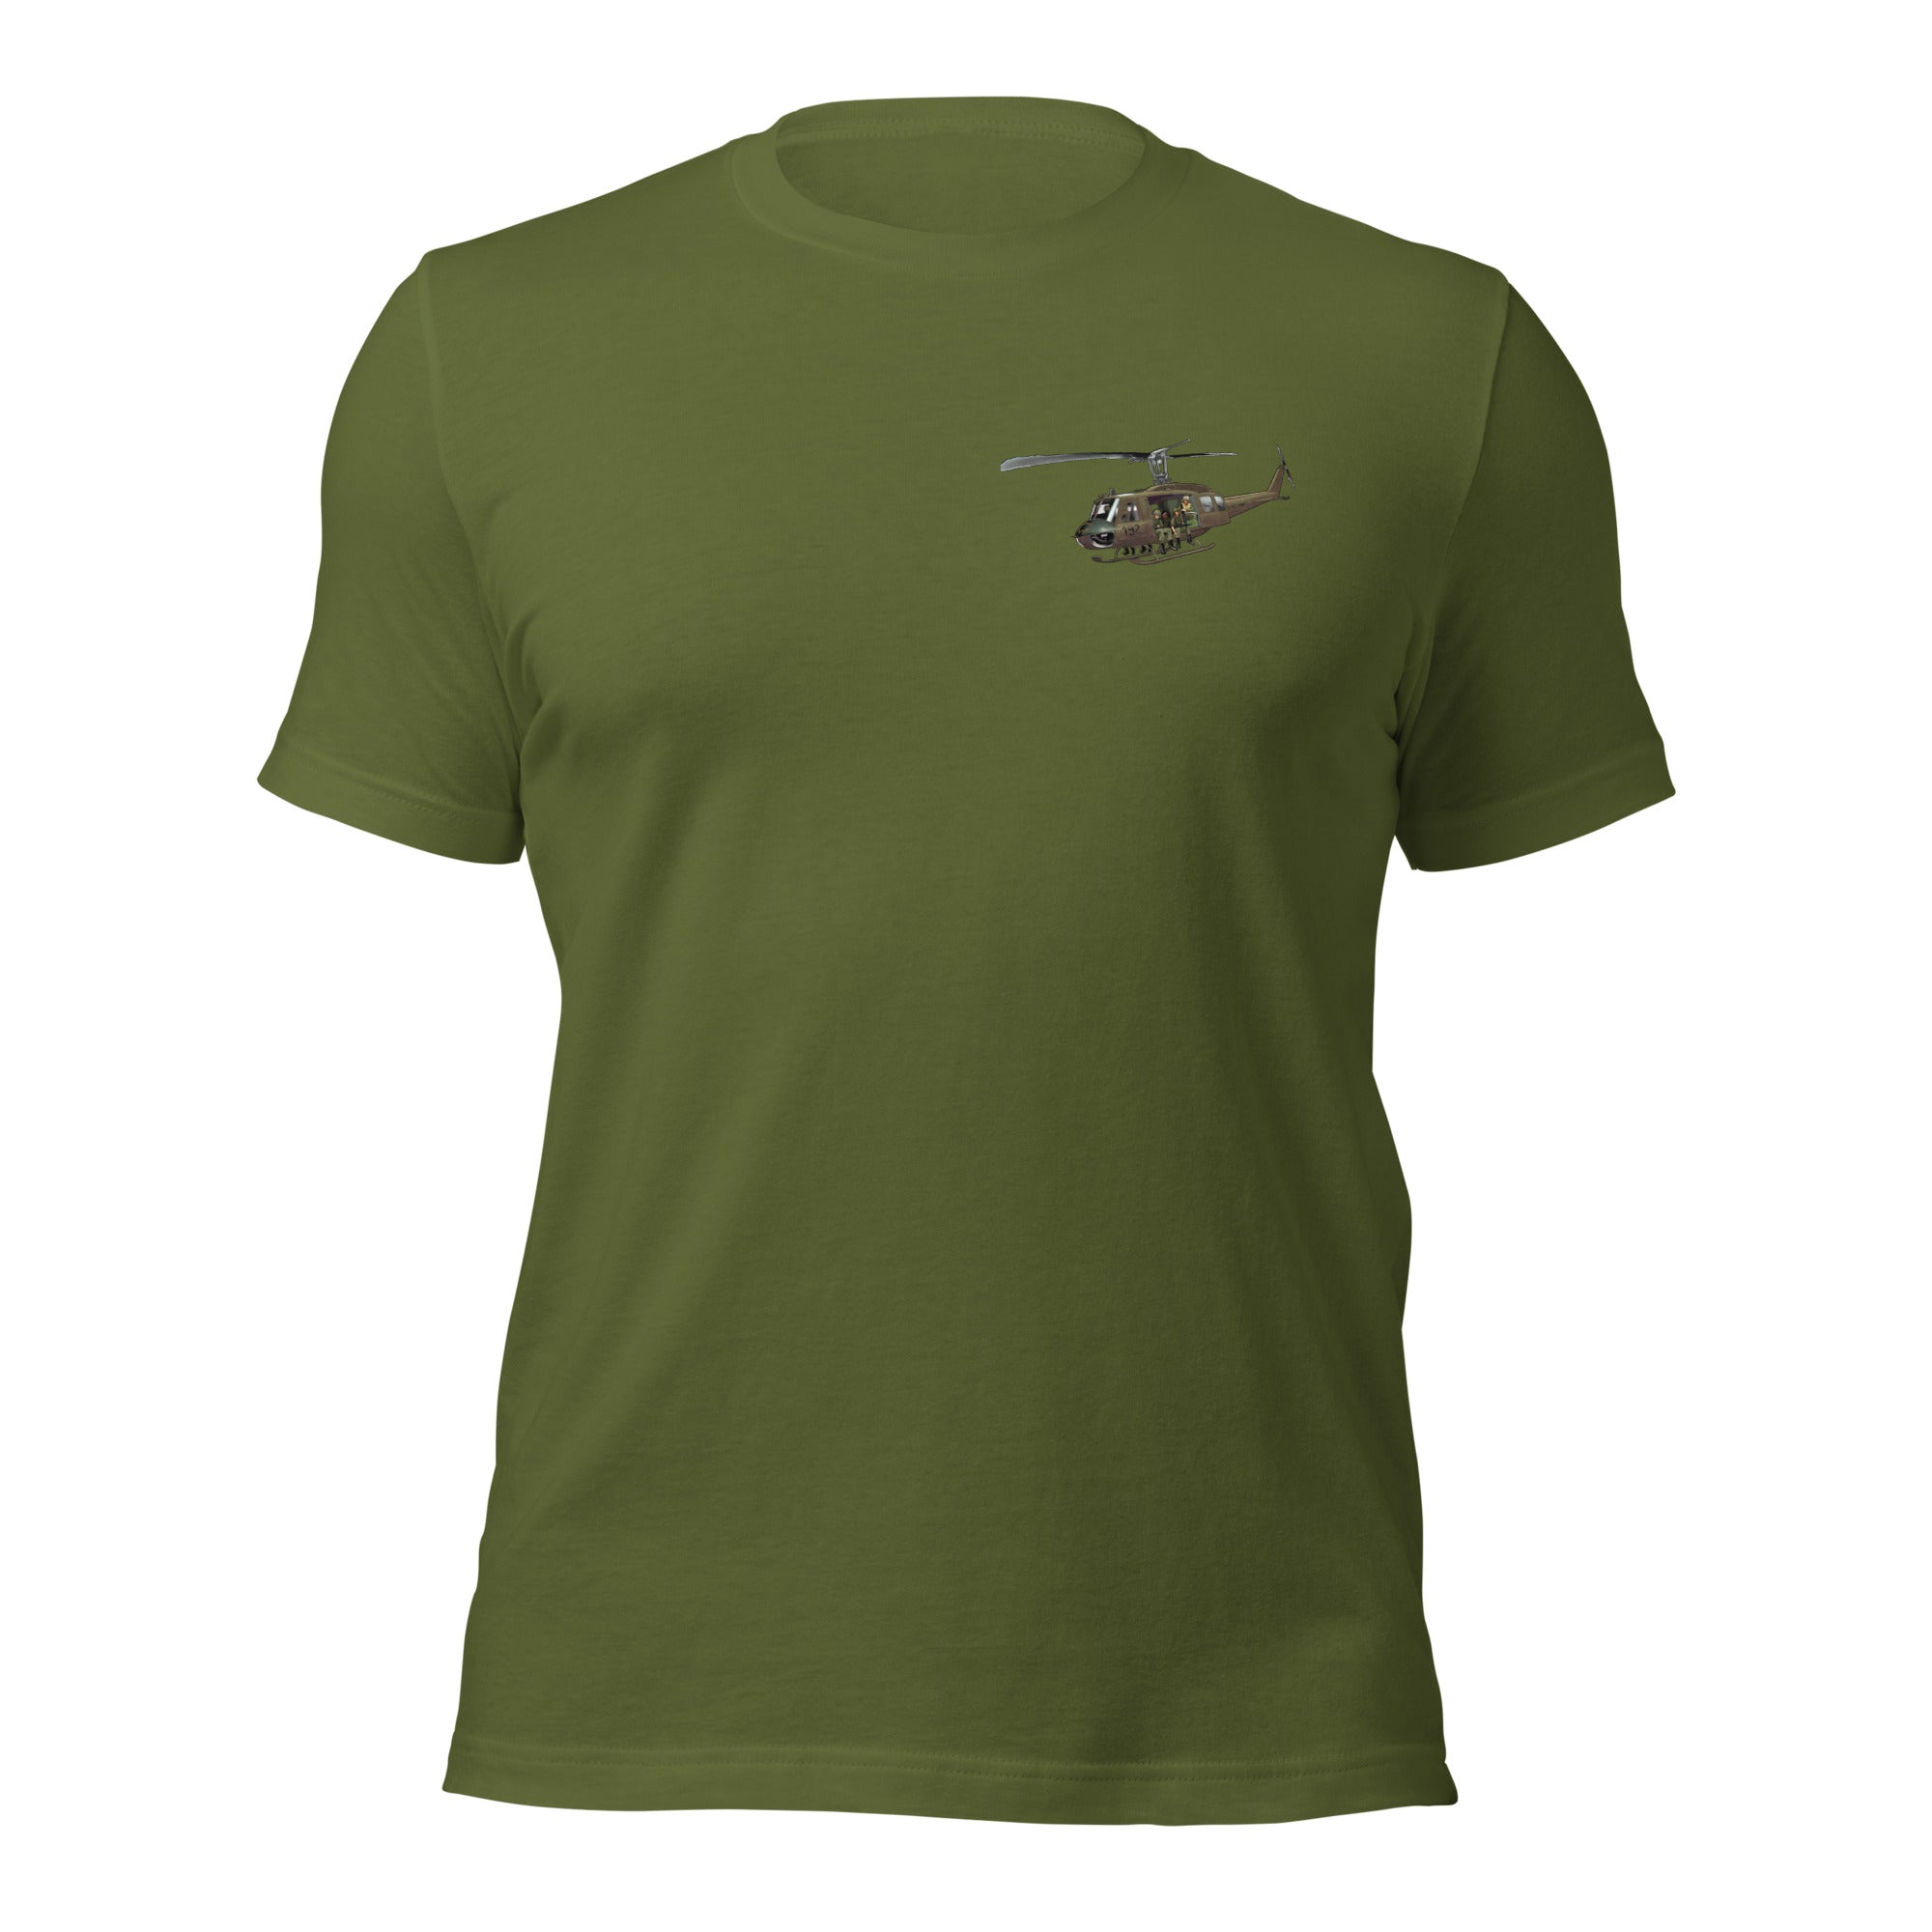 UH-1 HUEY Front Print Unisex Bella+Canvas t-shirt by Ruck & Rotor